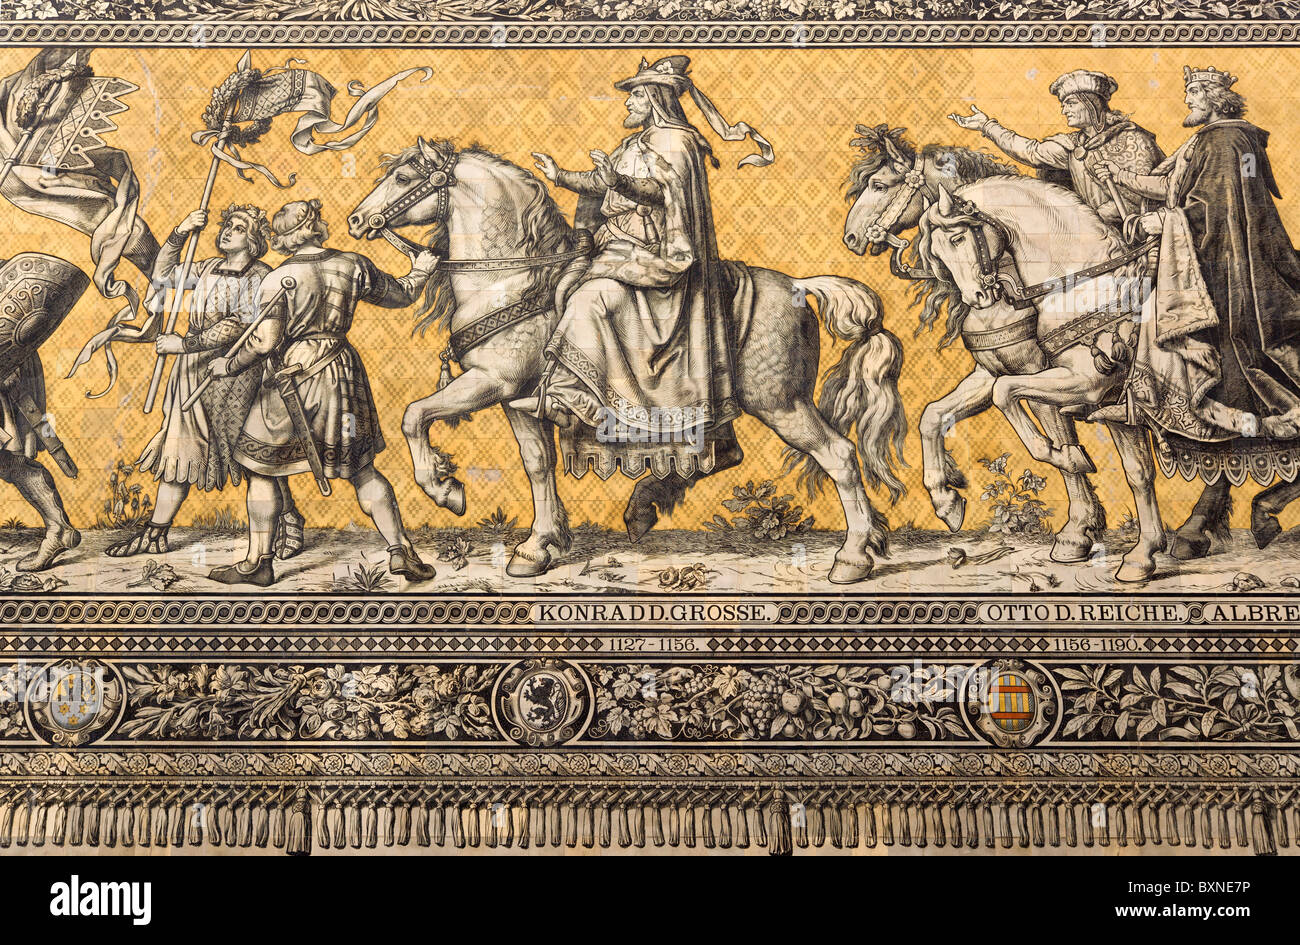 GERMANY Saxony Dresden Meissen tile mural Fürstenzug or Procession of Dukes in Auguststrasse. Detail showing Konrad The Great. Stock Photo